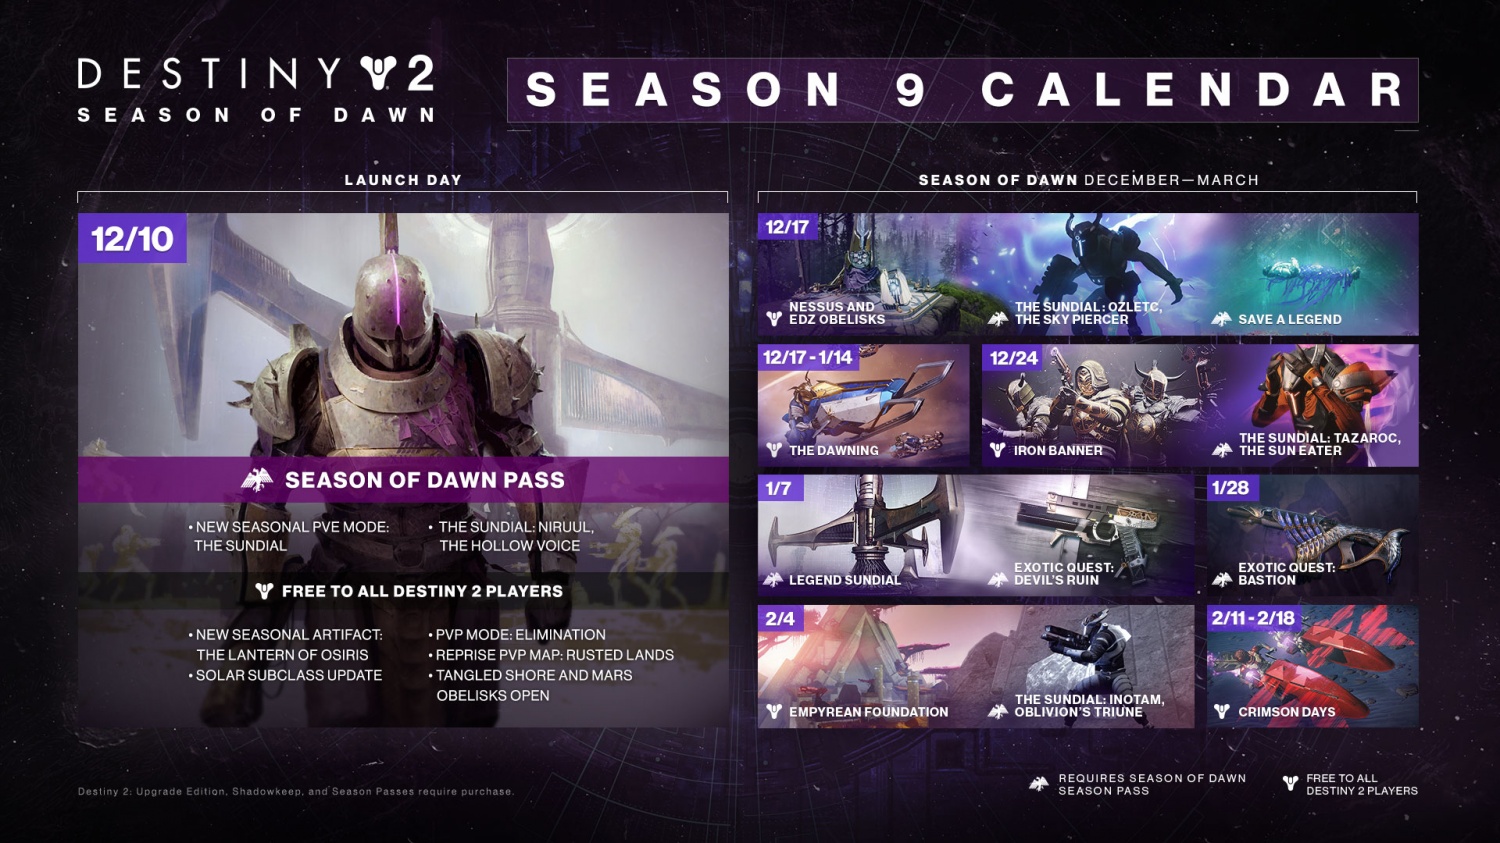 Here's How to Get a 'Destiny 2' Season of Dawn Exotic Armor for Free! What Else did the New Season Bring?